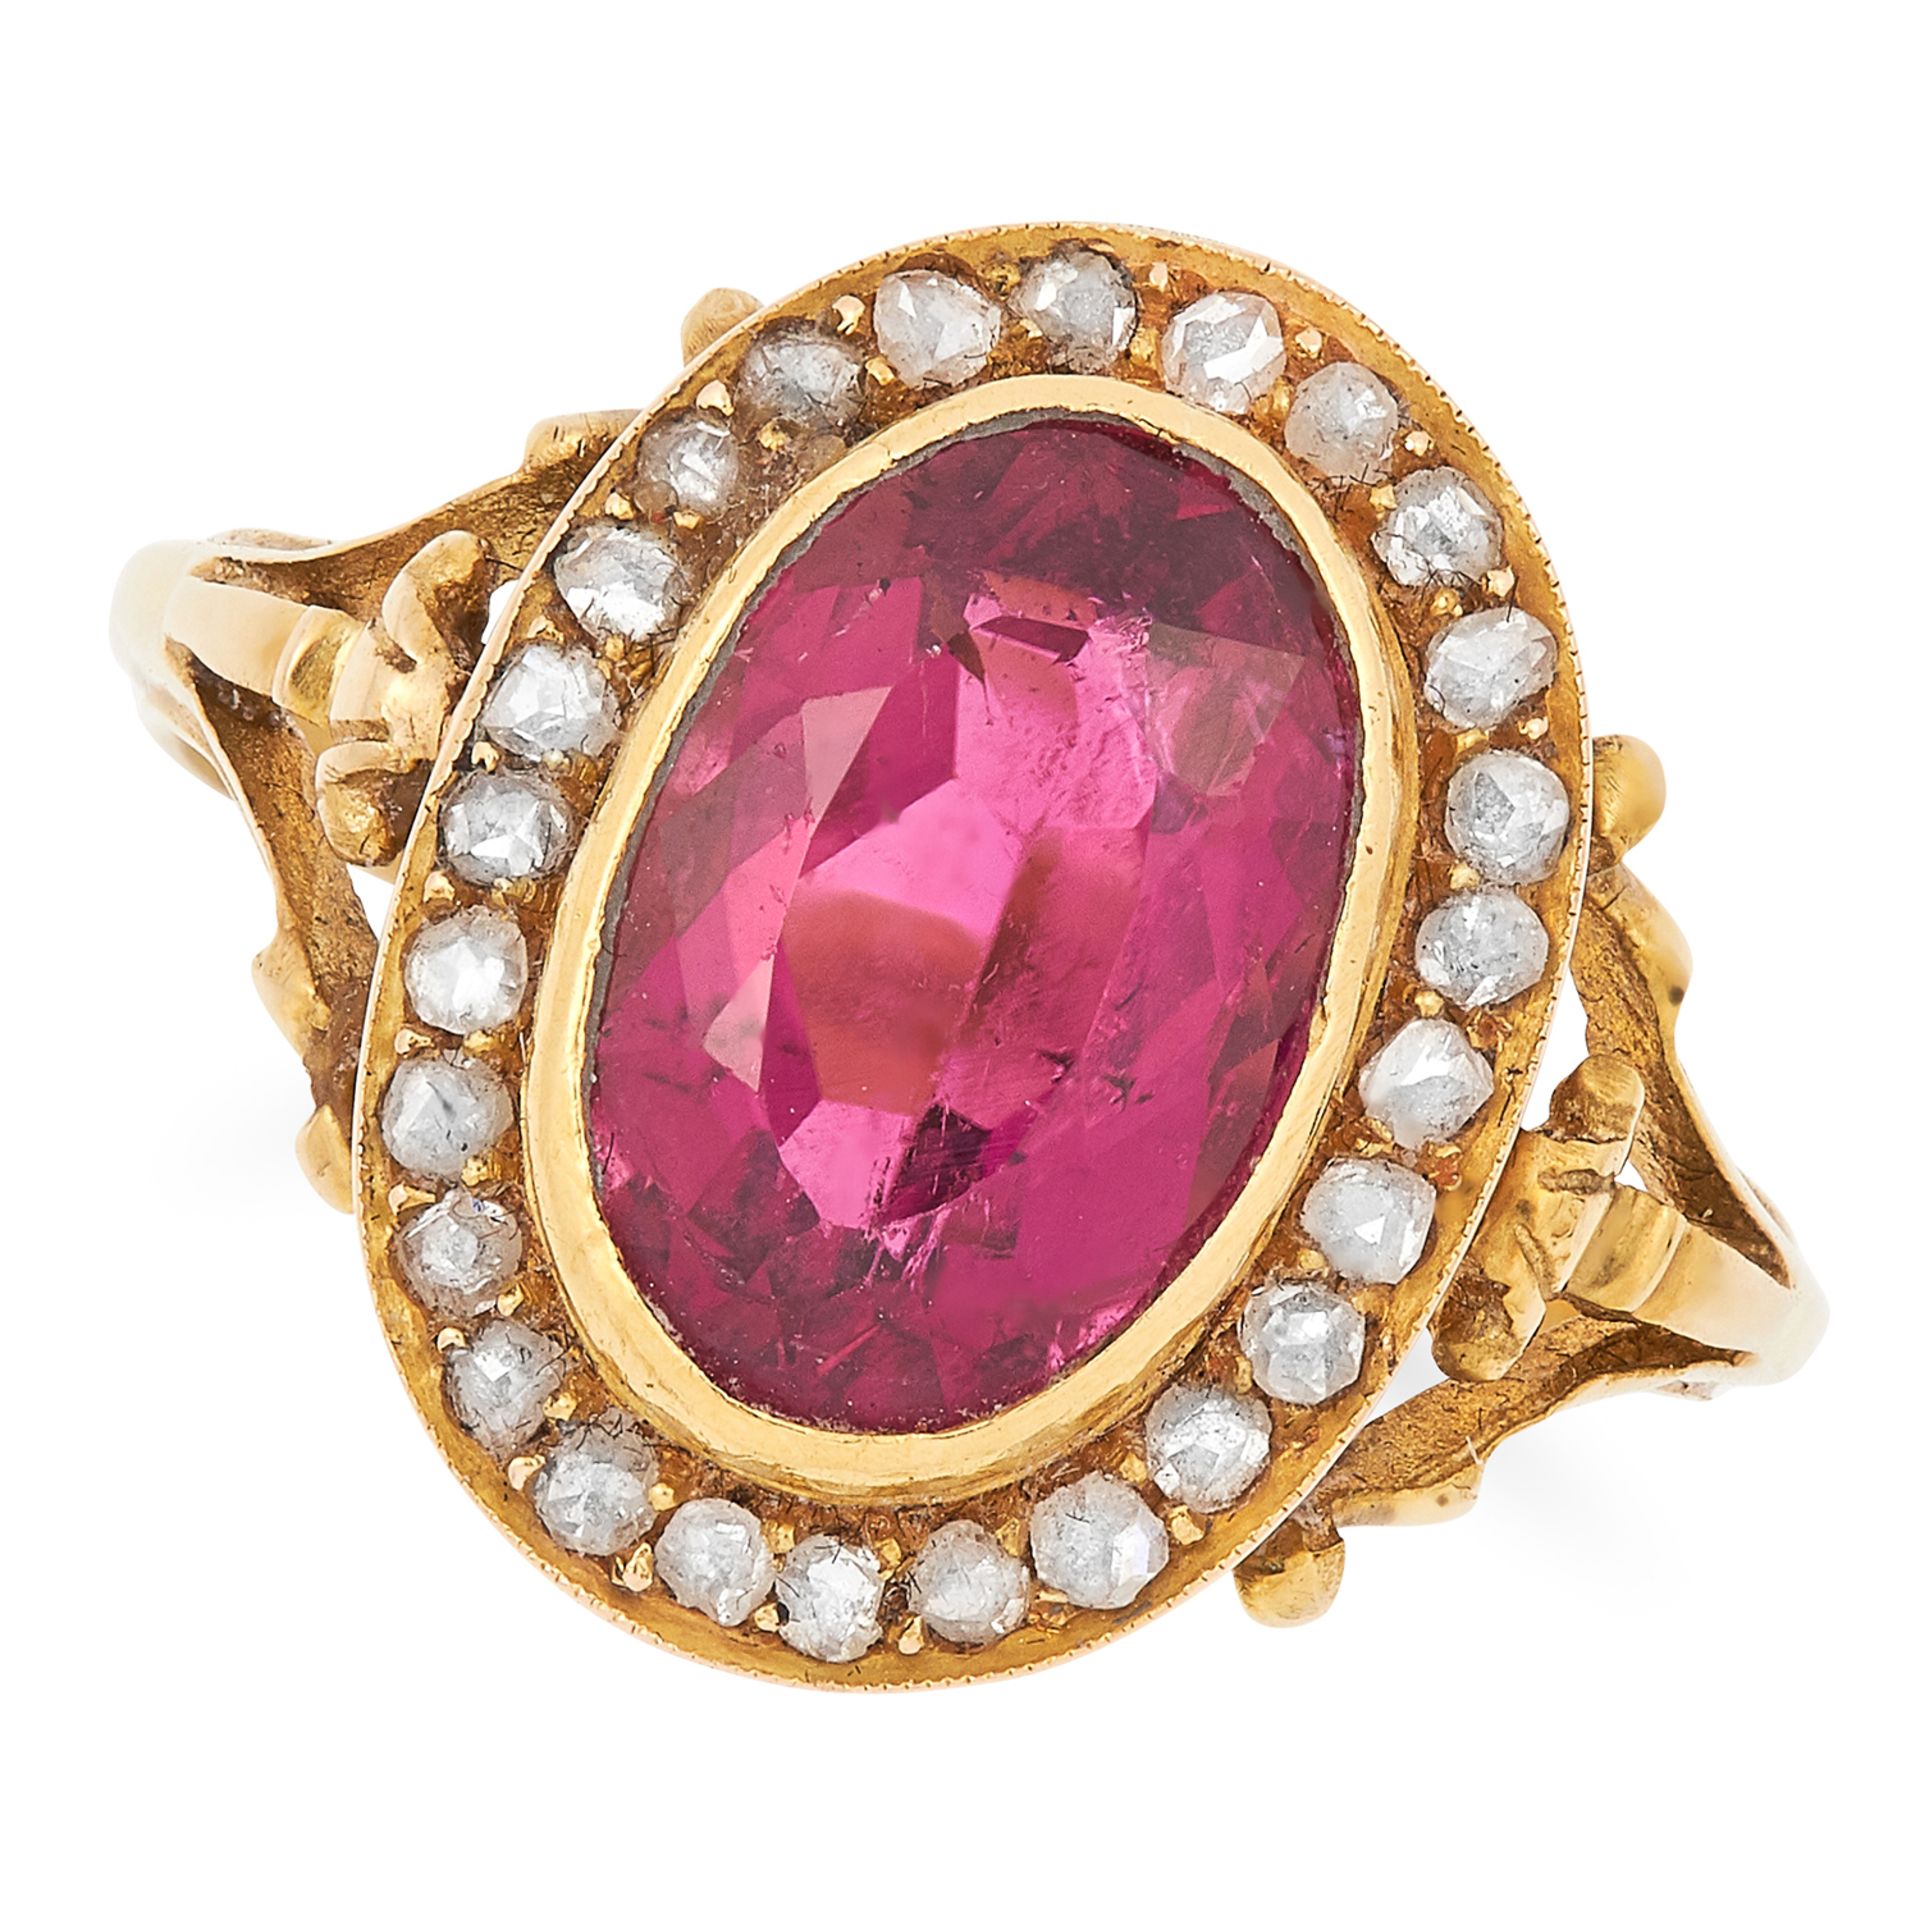 ANTIQUE TOURMALINE AND DIAMOND CLUSTER RING set with an oval cut tourmaline in a border of rose